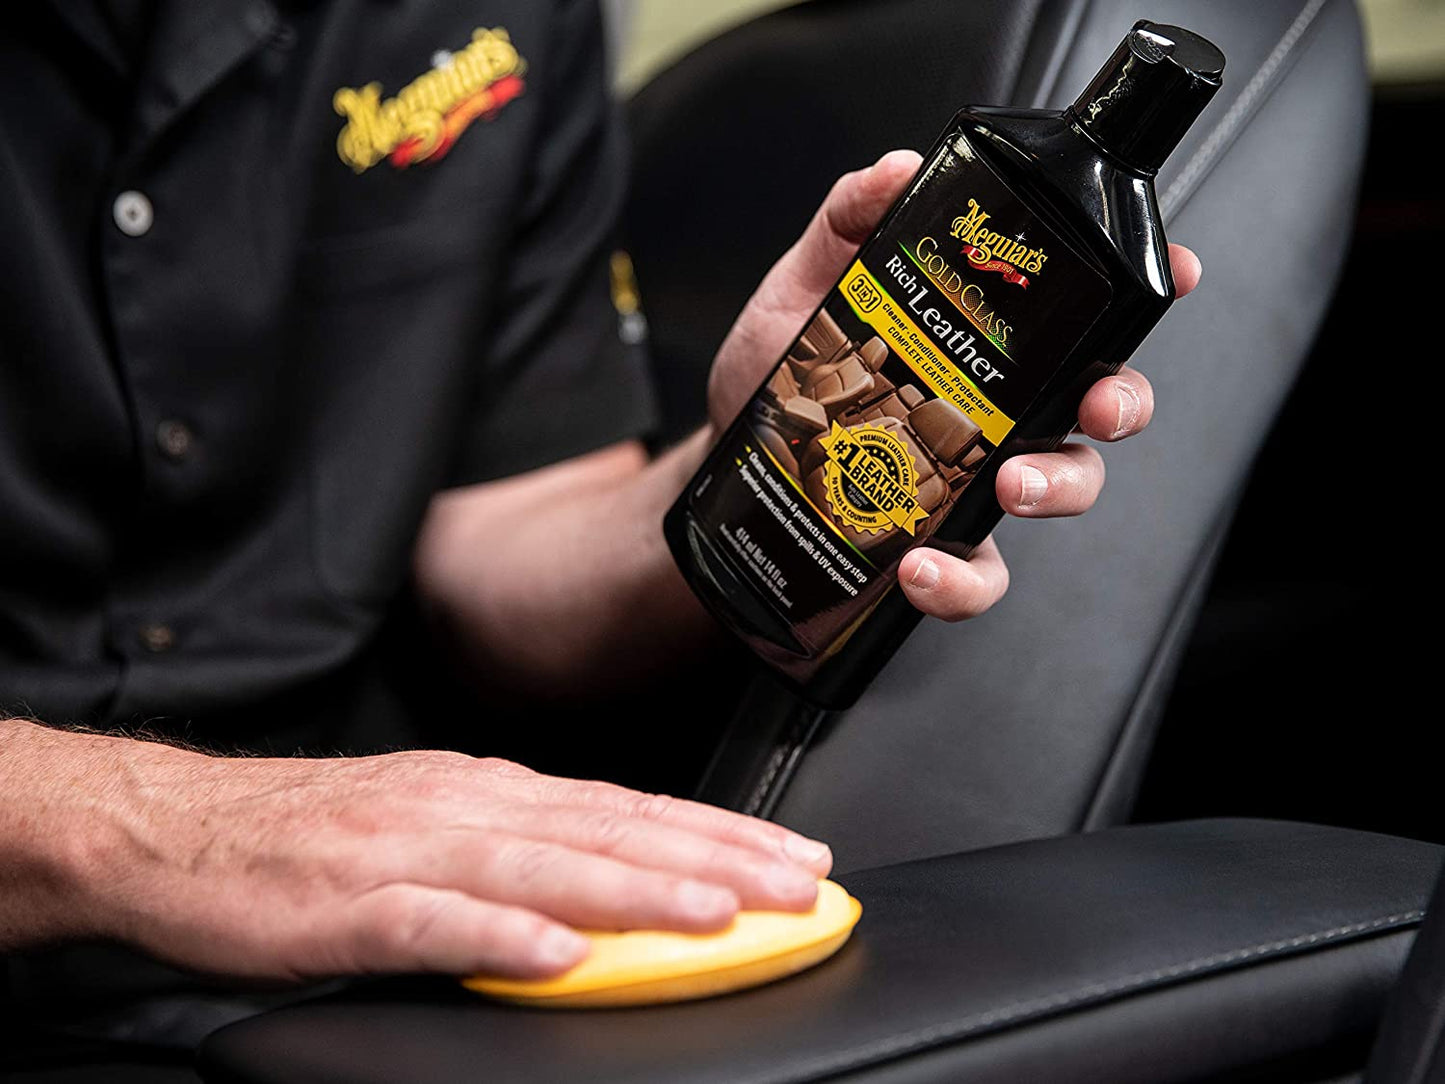 Meguiar's Gold Class Rich Leather Lotion – Cleans, Conditions & Protects for Complete Care – G7214, 14 oz